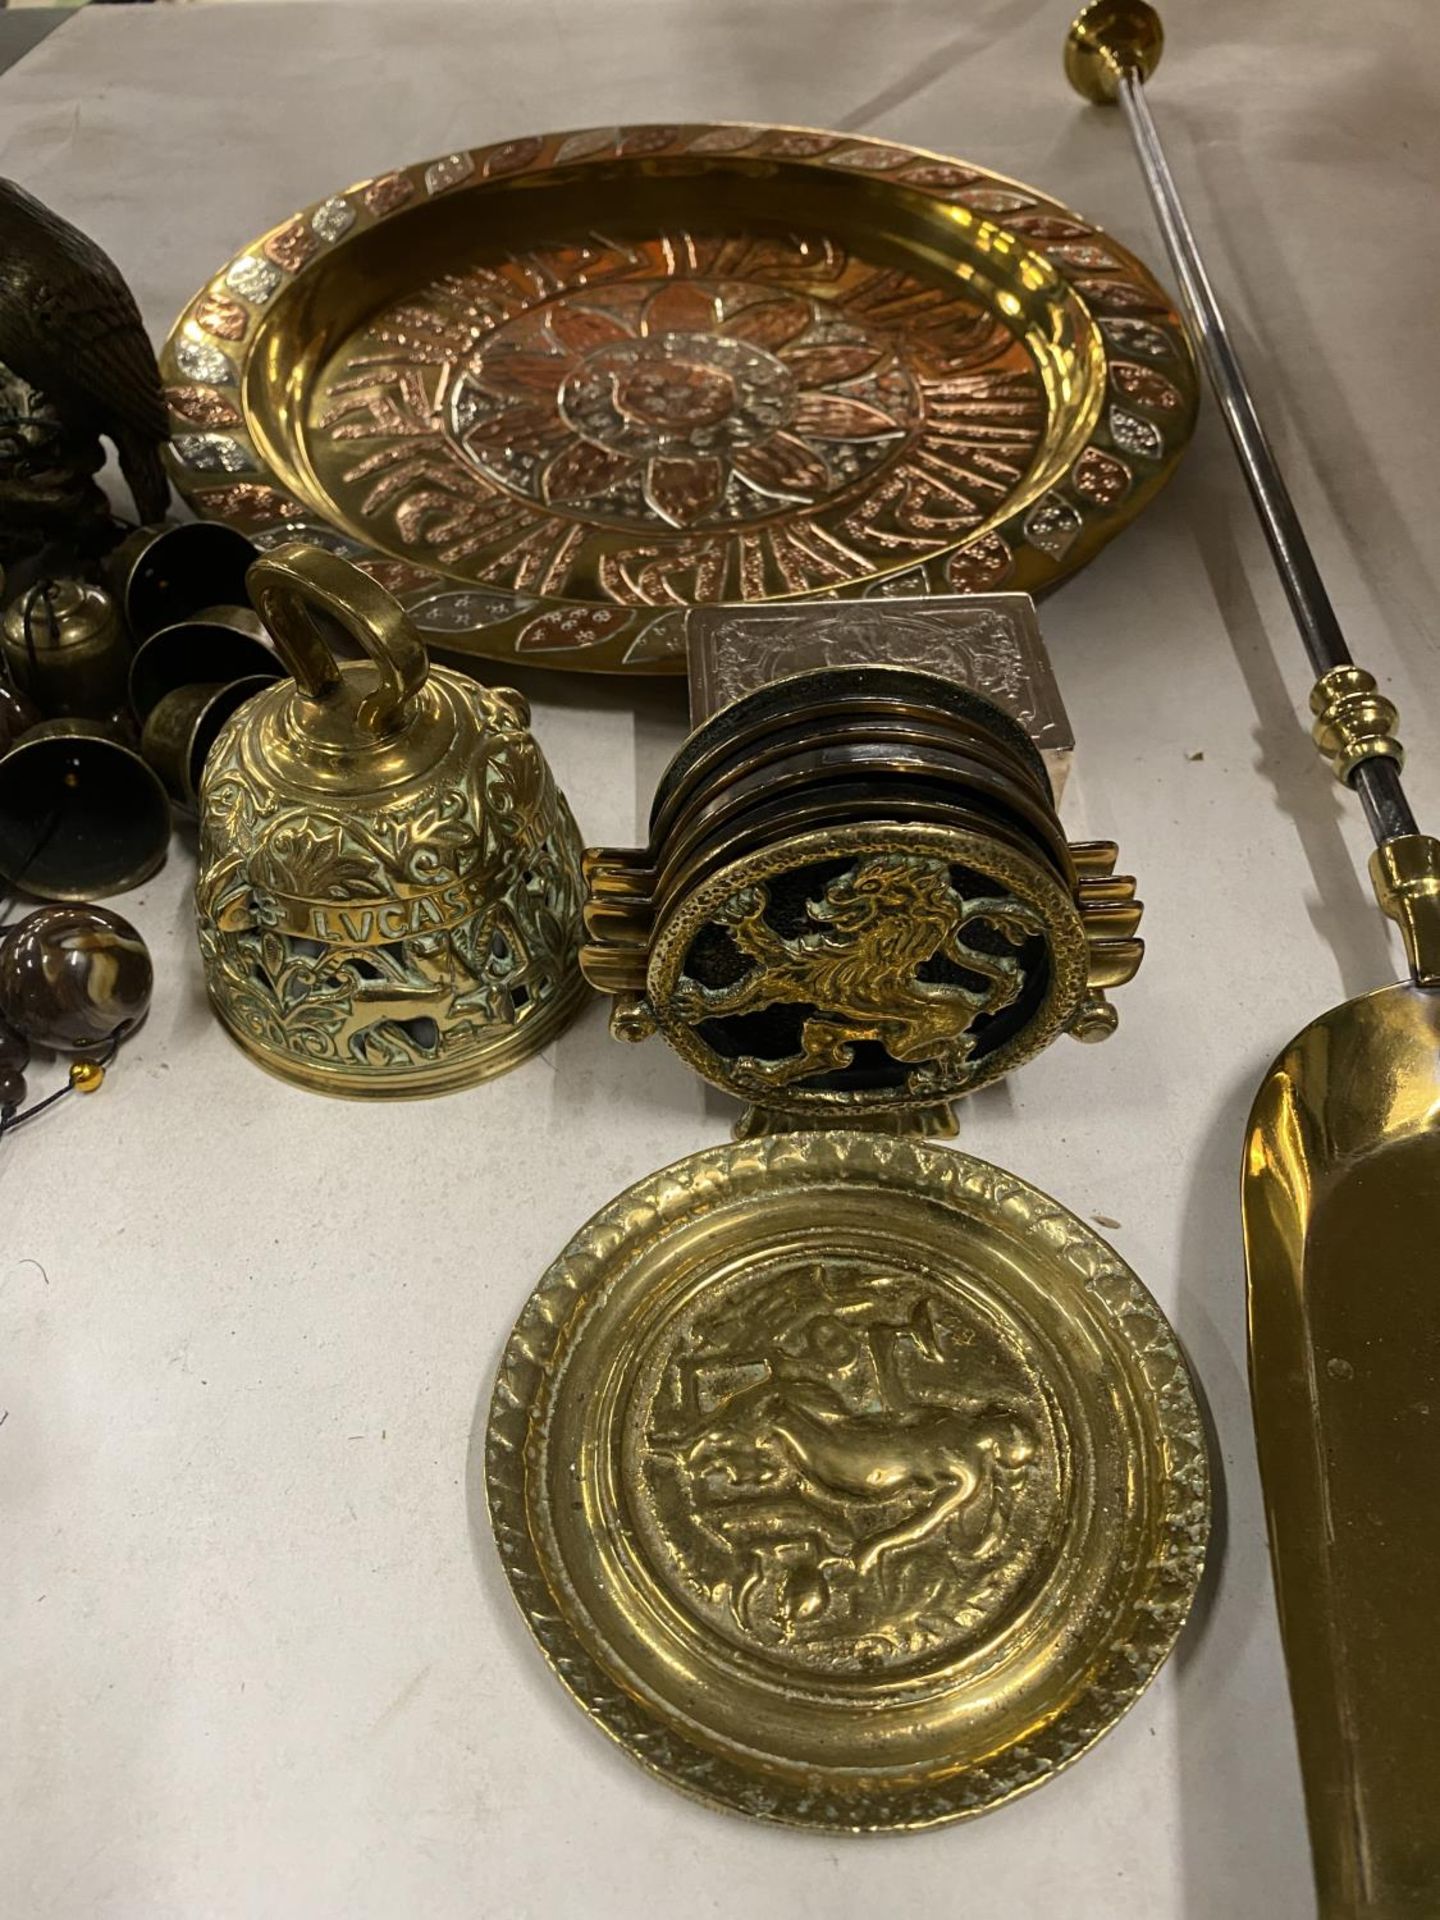 A QUANTITY OF BRASSWARE TO INCLUDE A 'BIRD' WINDCHIME, COASTERS WITH EMBOSSED LIONS, A BOX, PLATE, - Image 2 of 4